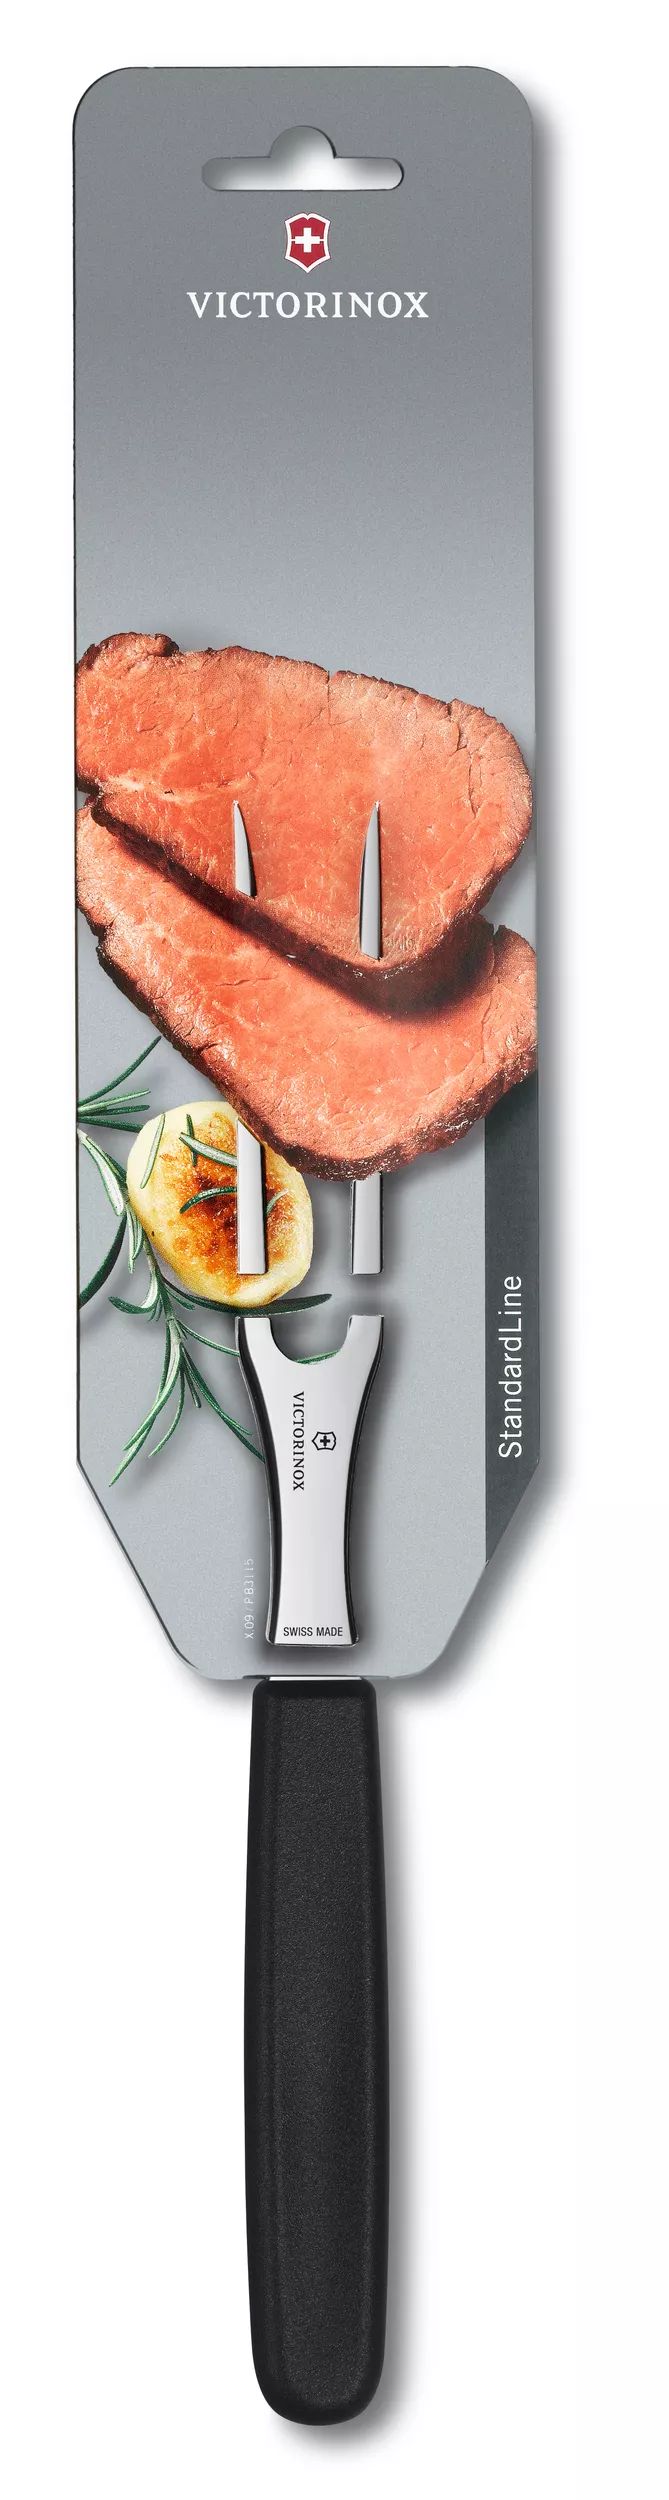 Swiss Classic Carving Fork - 5.2103.15B